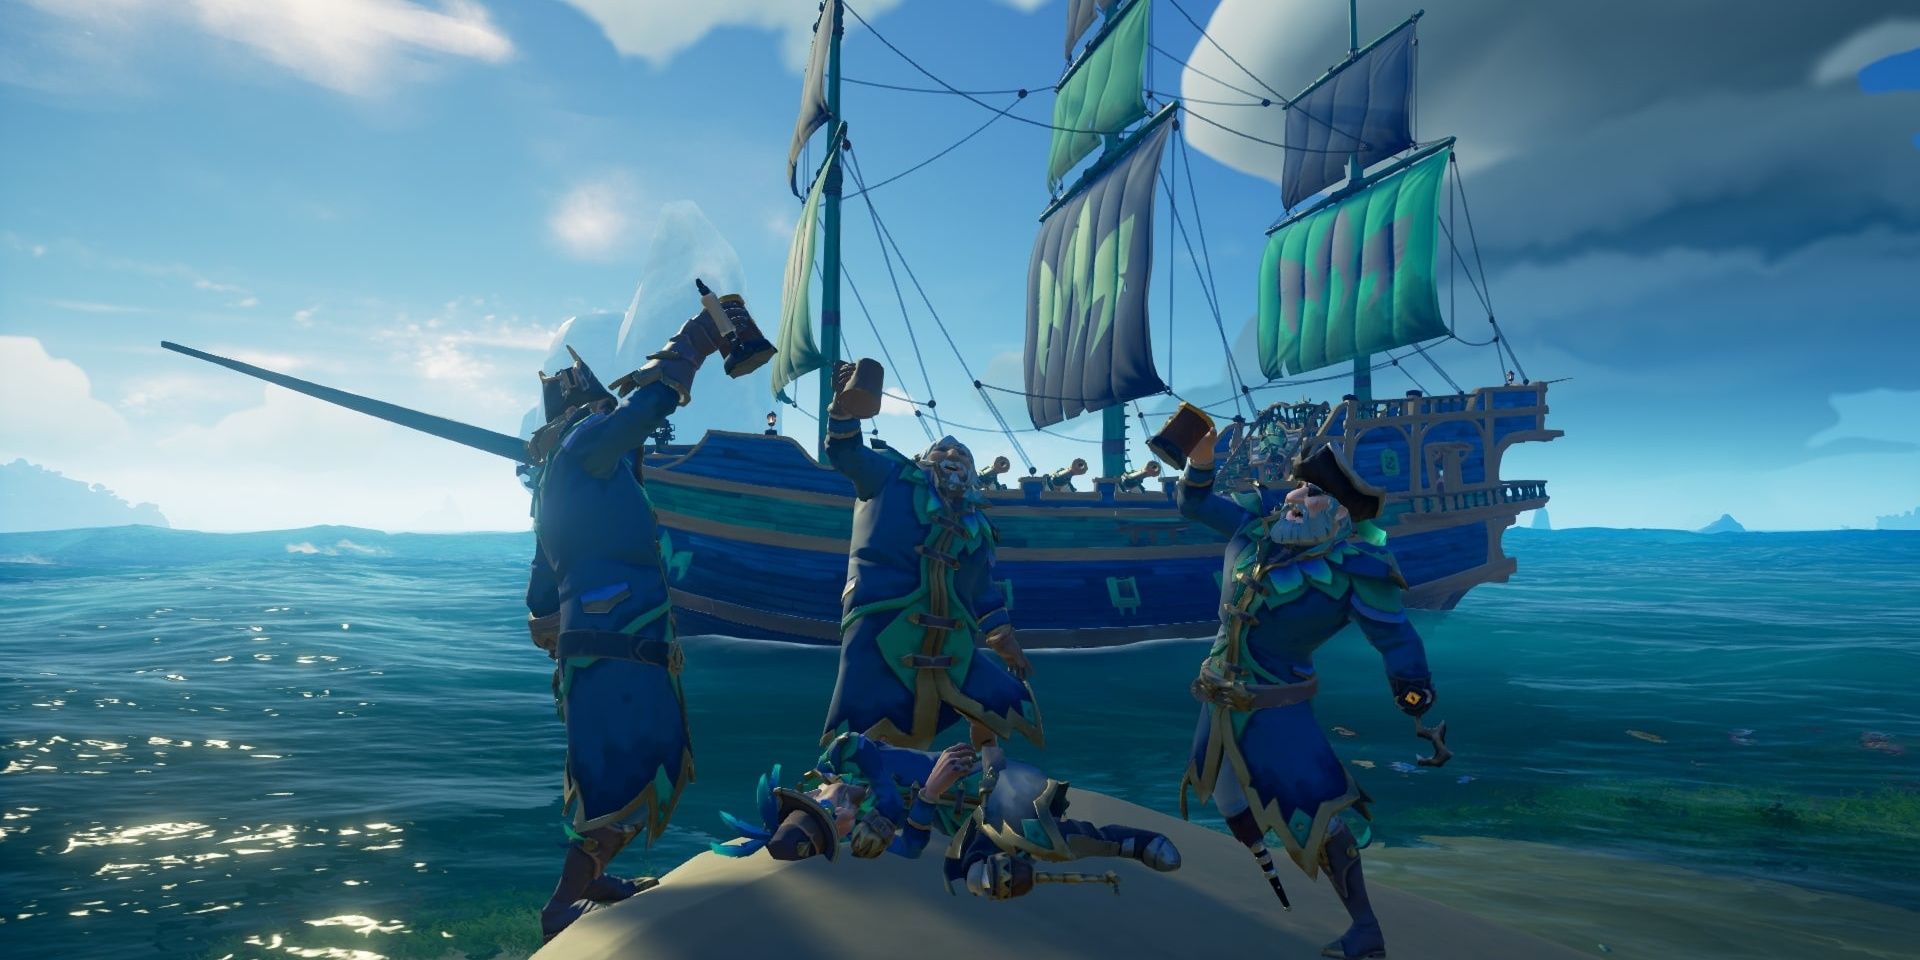 Pirates wearing Parrot Set clothing with matching ship in Sea of Thieves